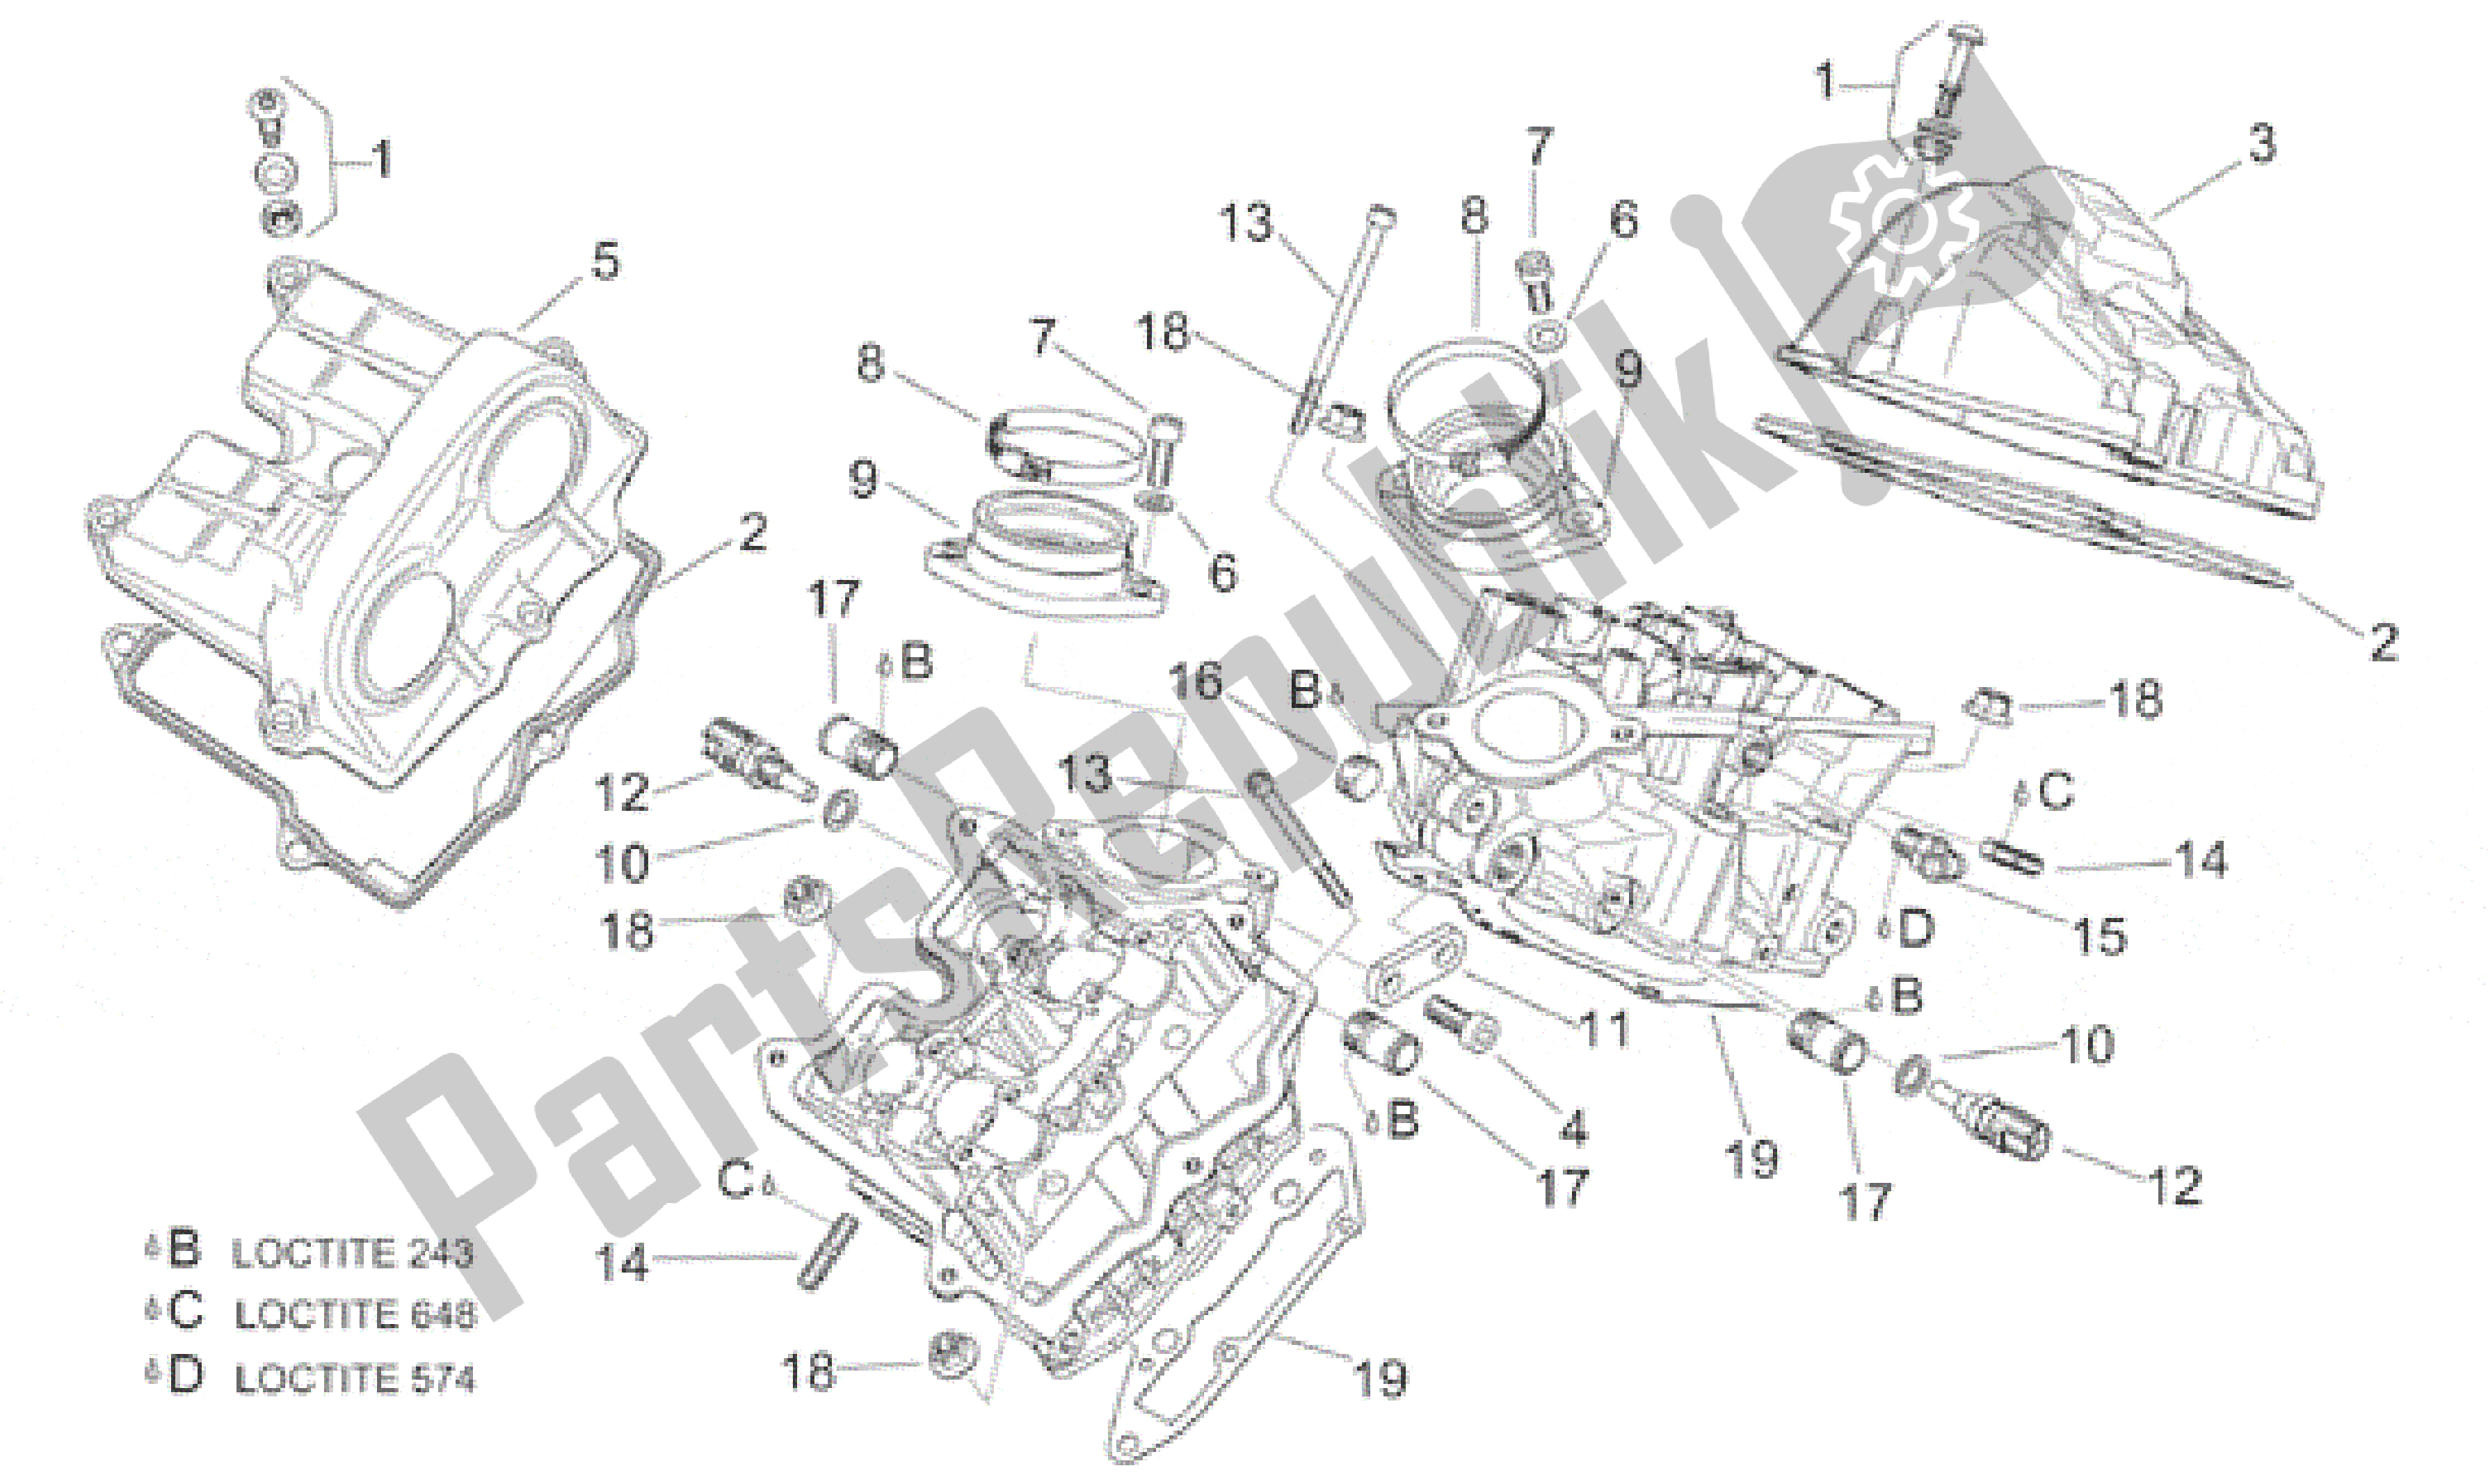 All parts for the Valves Cover of the Aprilia RSV Mille 390 W 1000 1998 - 1999